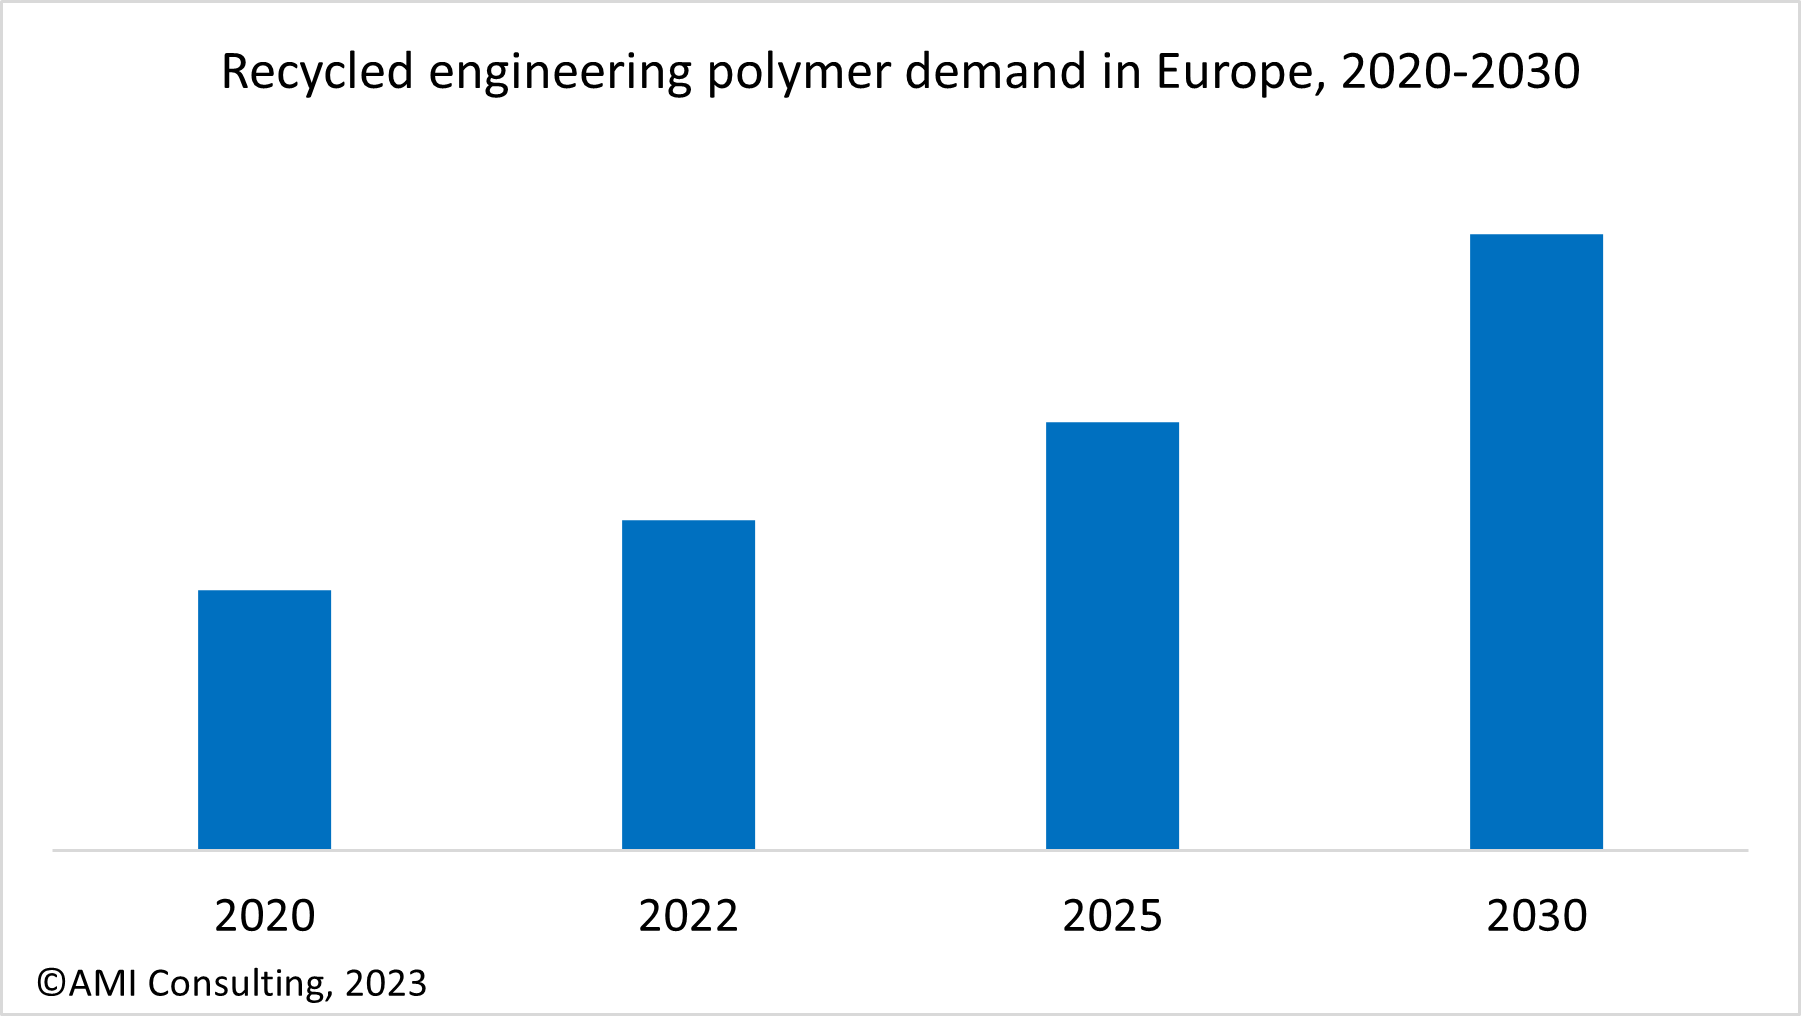 Recycled engineering polymer demand in Europe, 2020-2030